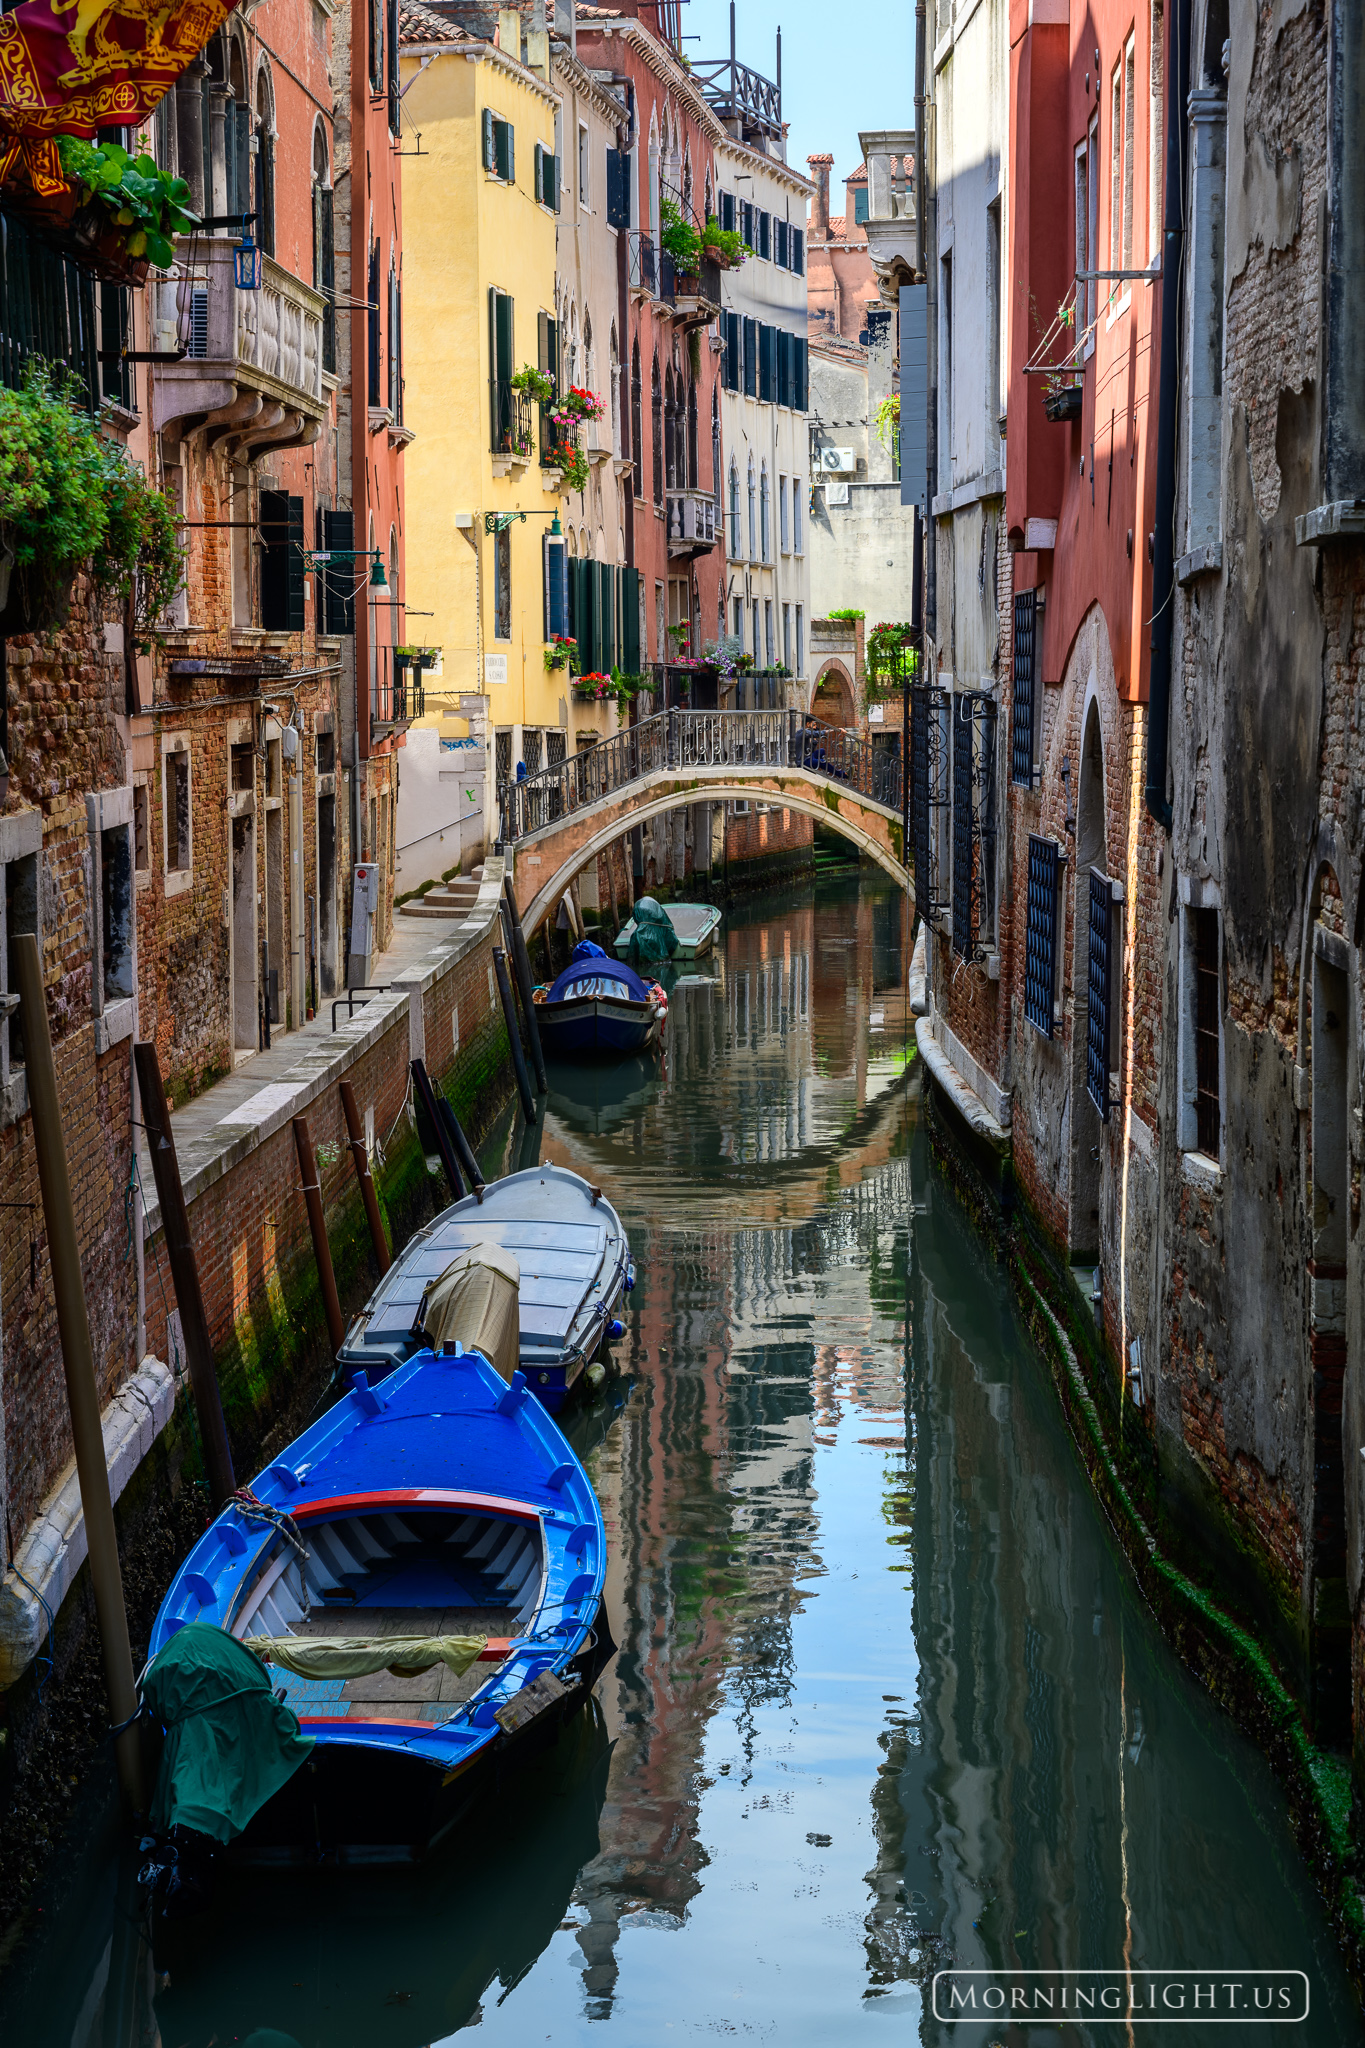 Venice is undoubtedly one of our world's most romantic cities. Its colorful buildings and canals are the things of dreams.